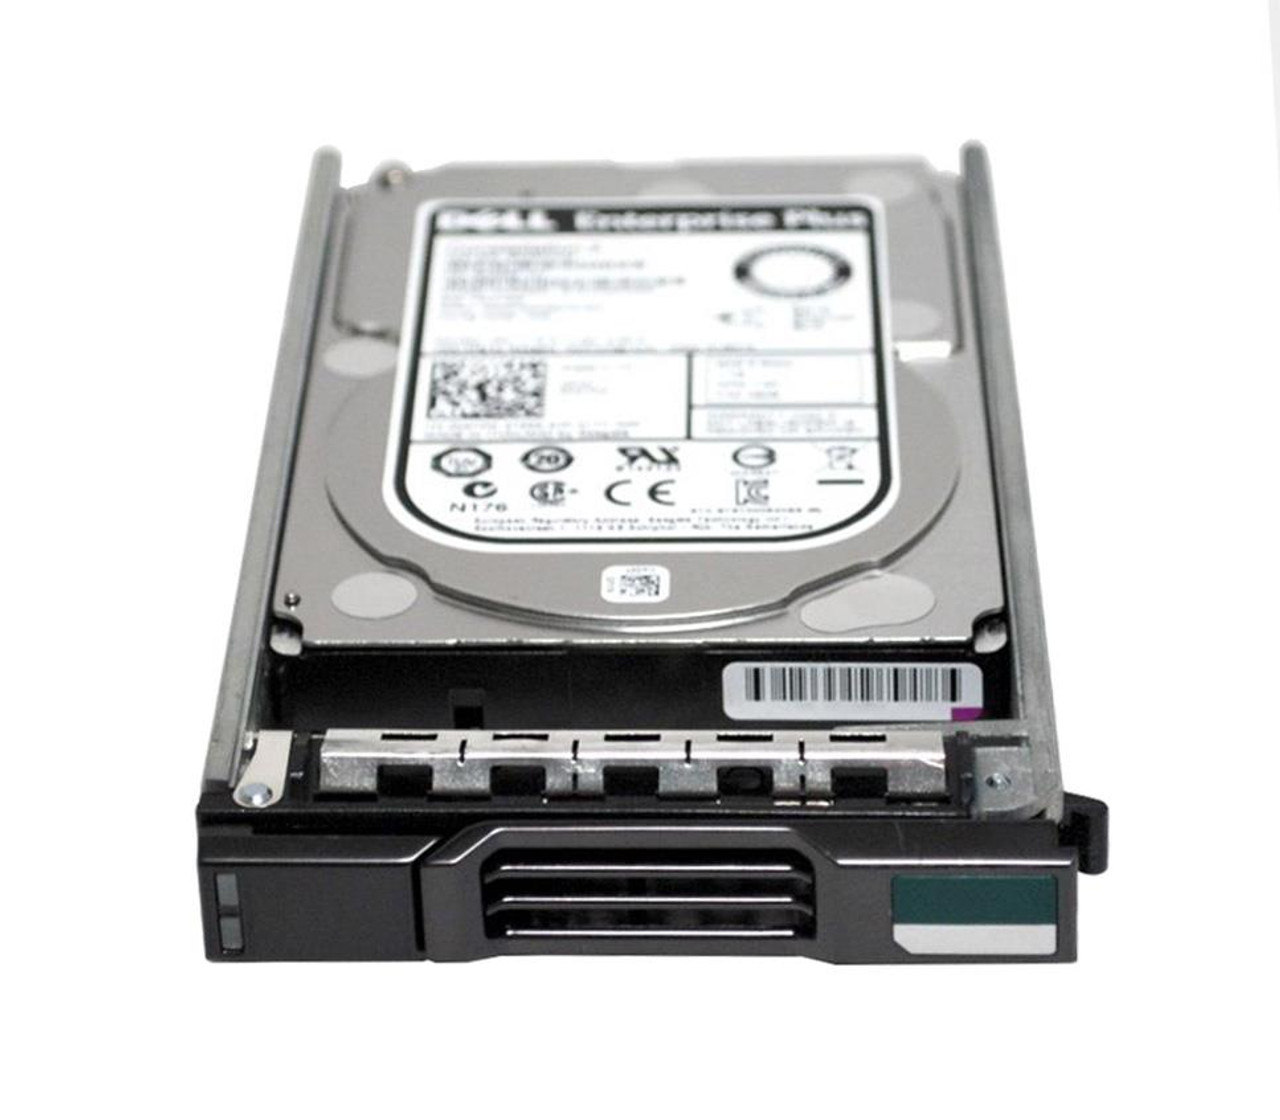 H194D Dell 2TB 7200RPM SAS 12Gbps Hot Swap 128MB Cache 2.5-inch Internal Hard Drive with Tray